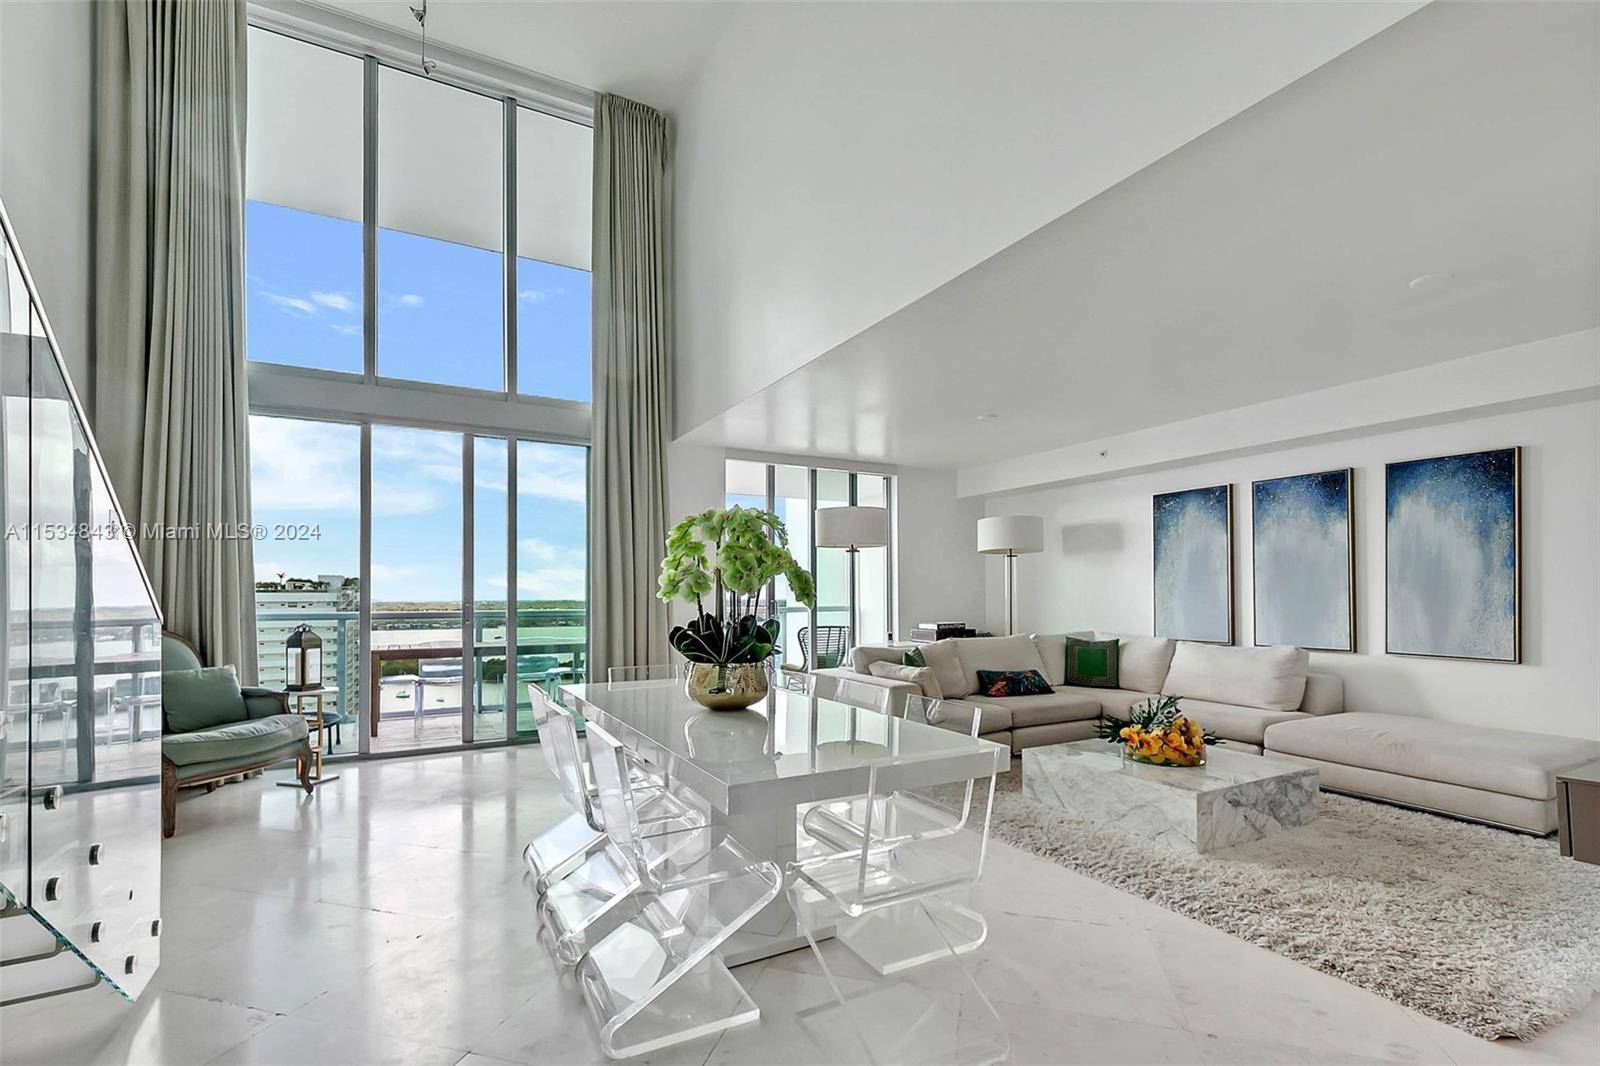 Spectacular 2 story penthouse with stunning water views.